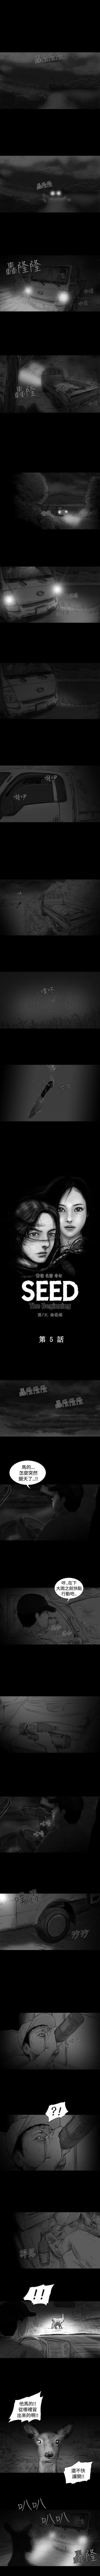 SEED The Beginning 1-36 12